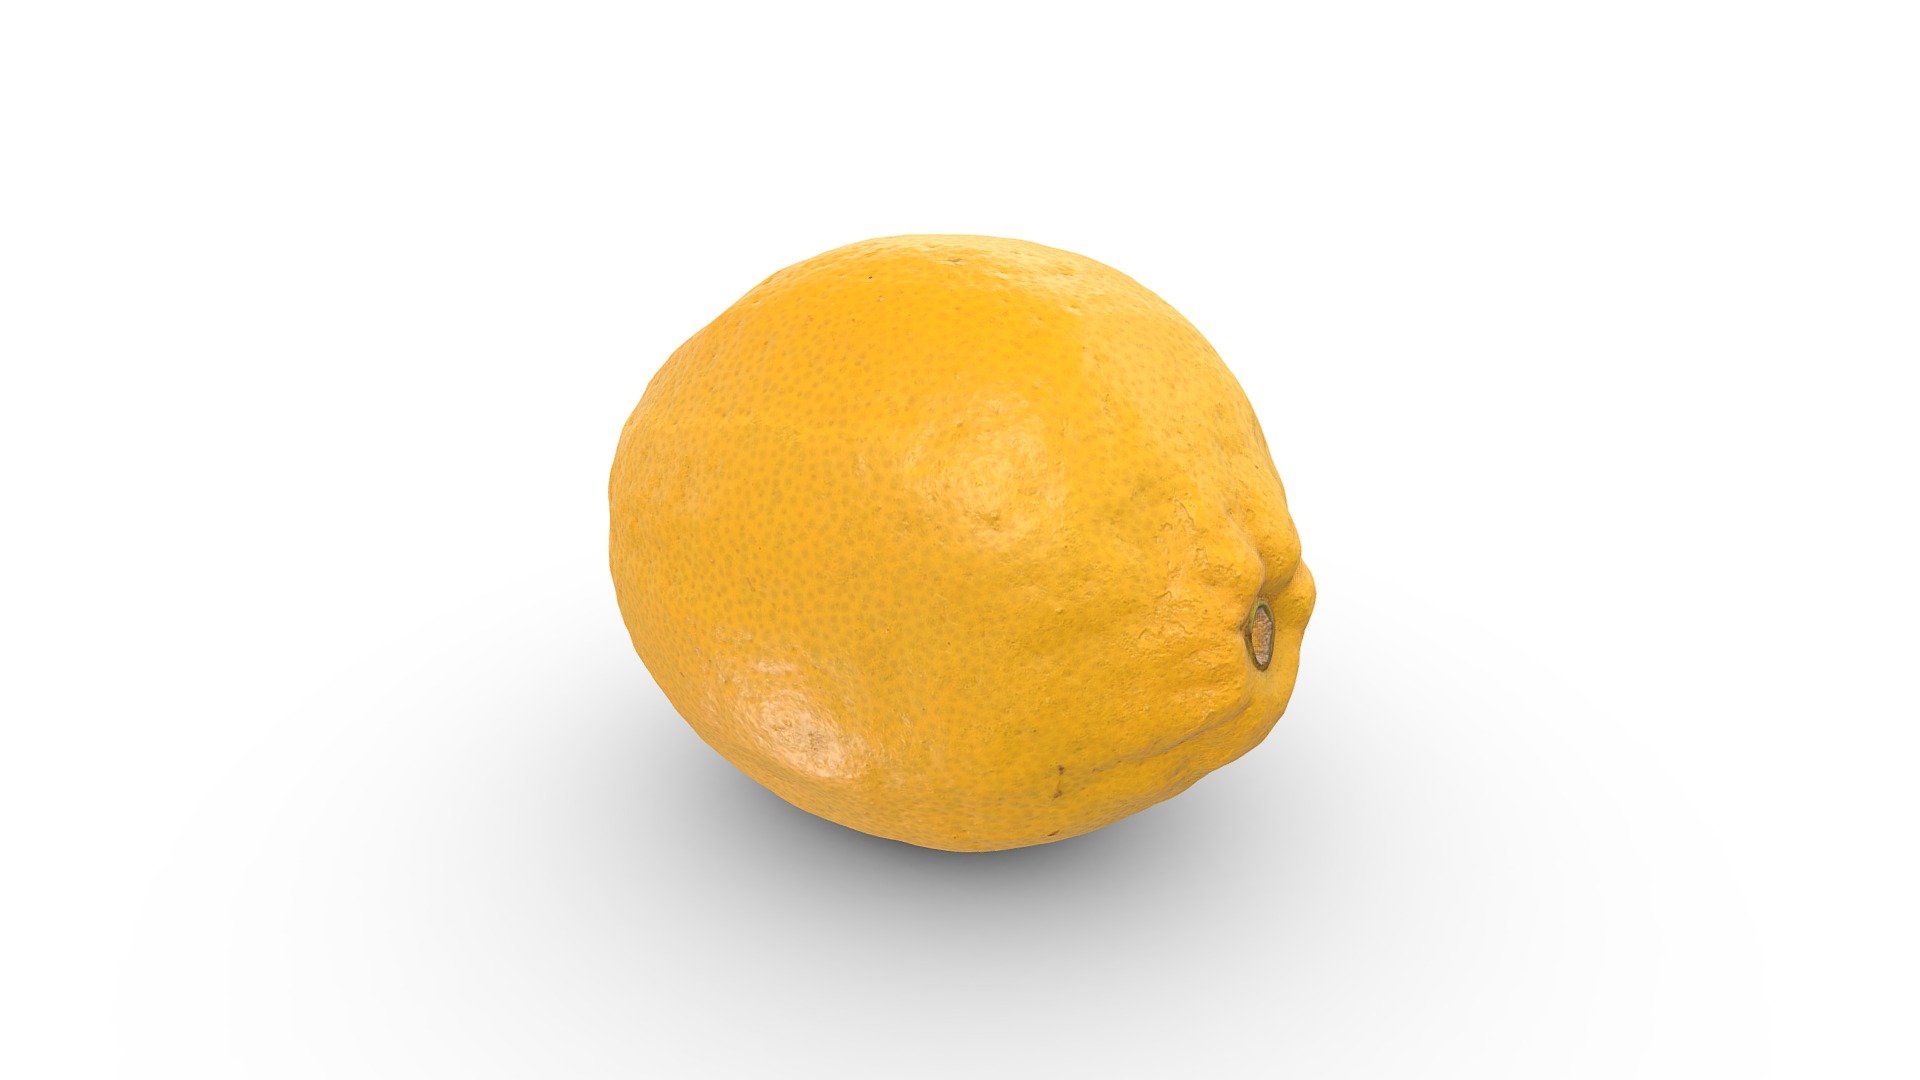 High-poly ripe lemon photogrammetry scan. PBR texture maps 4096x4096 px. resolution for metallic or specular workflow. Scan from real fruit, high-poly 3D model, 4K resolution textures.

Additional file contains source PNG &amp; JPEG texture maps and low-poly 3d model version 3d model